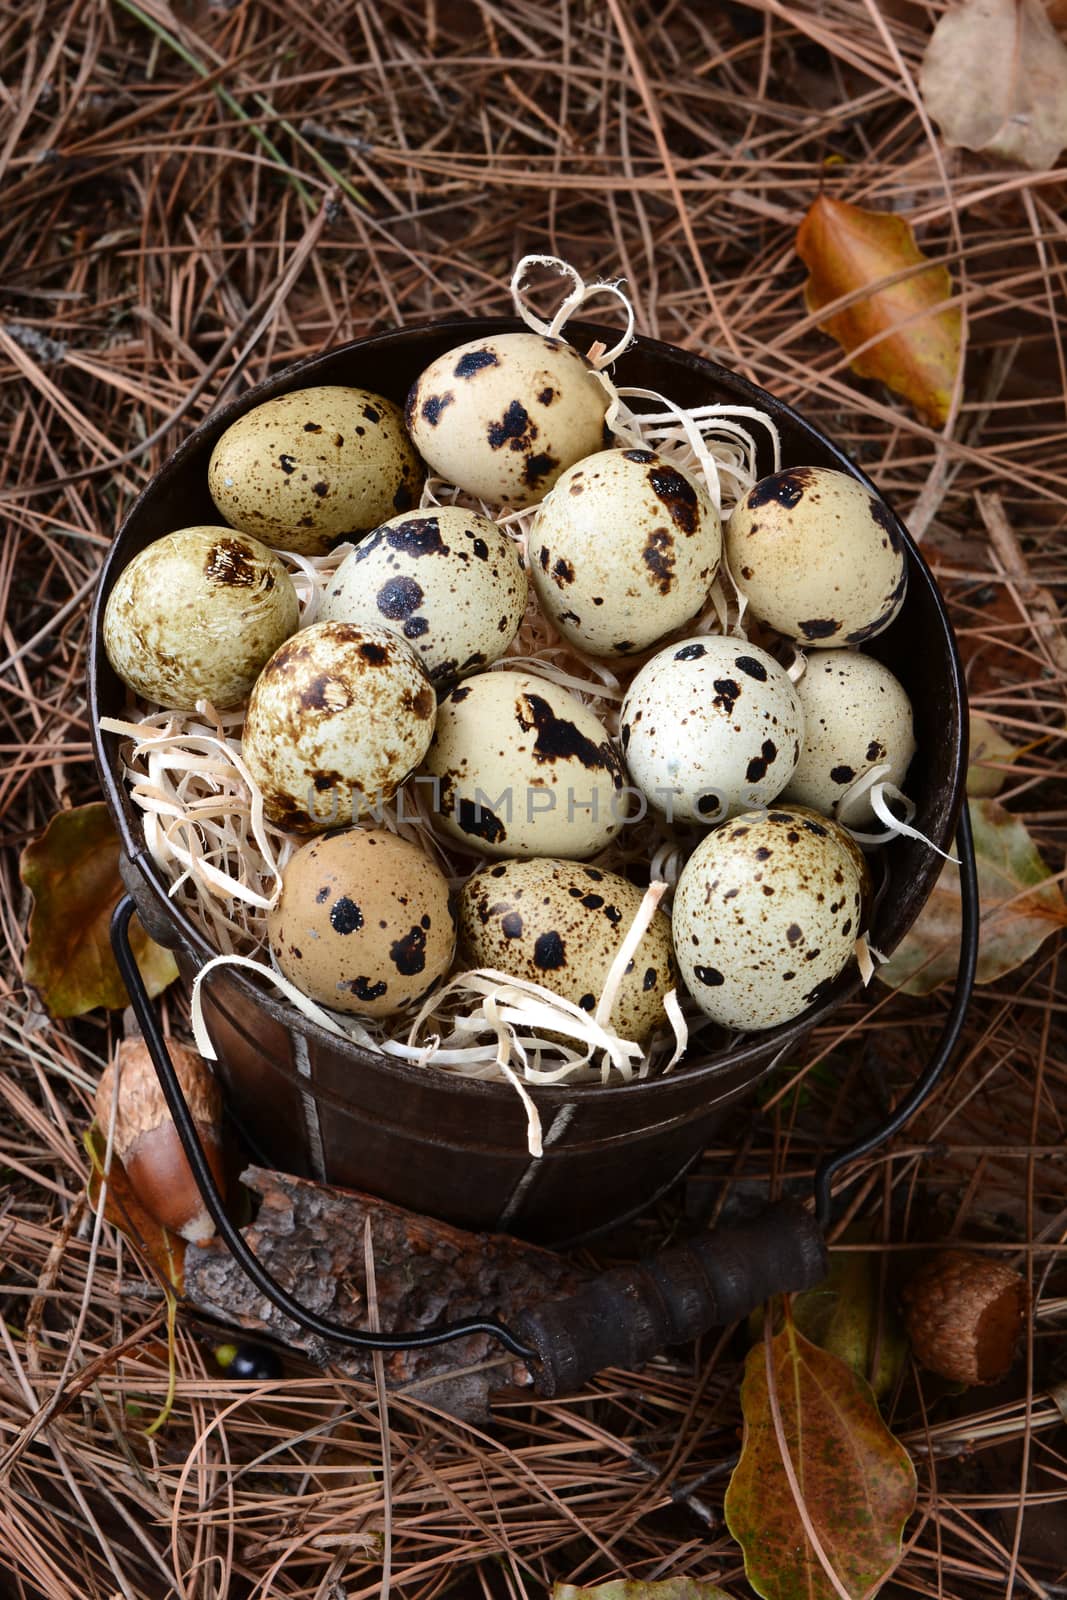 Bucket of Quail Eggs on Leaves and Twigs by sCukrov